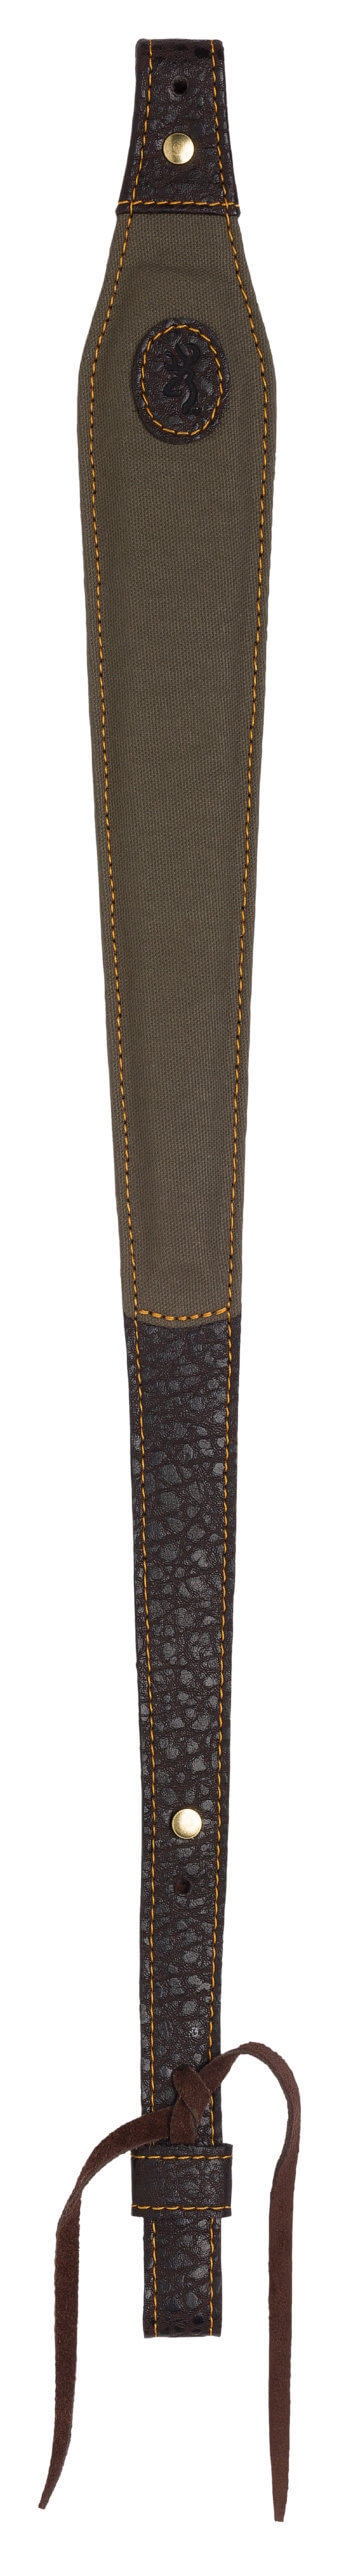 Browning 12250484 Laredo Sling made of Olive Cotton Canvas with Leather Trim 25.50″-35.50″ OAL & Adjustable Design for Rifles